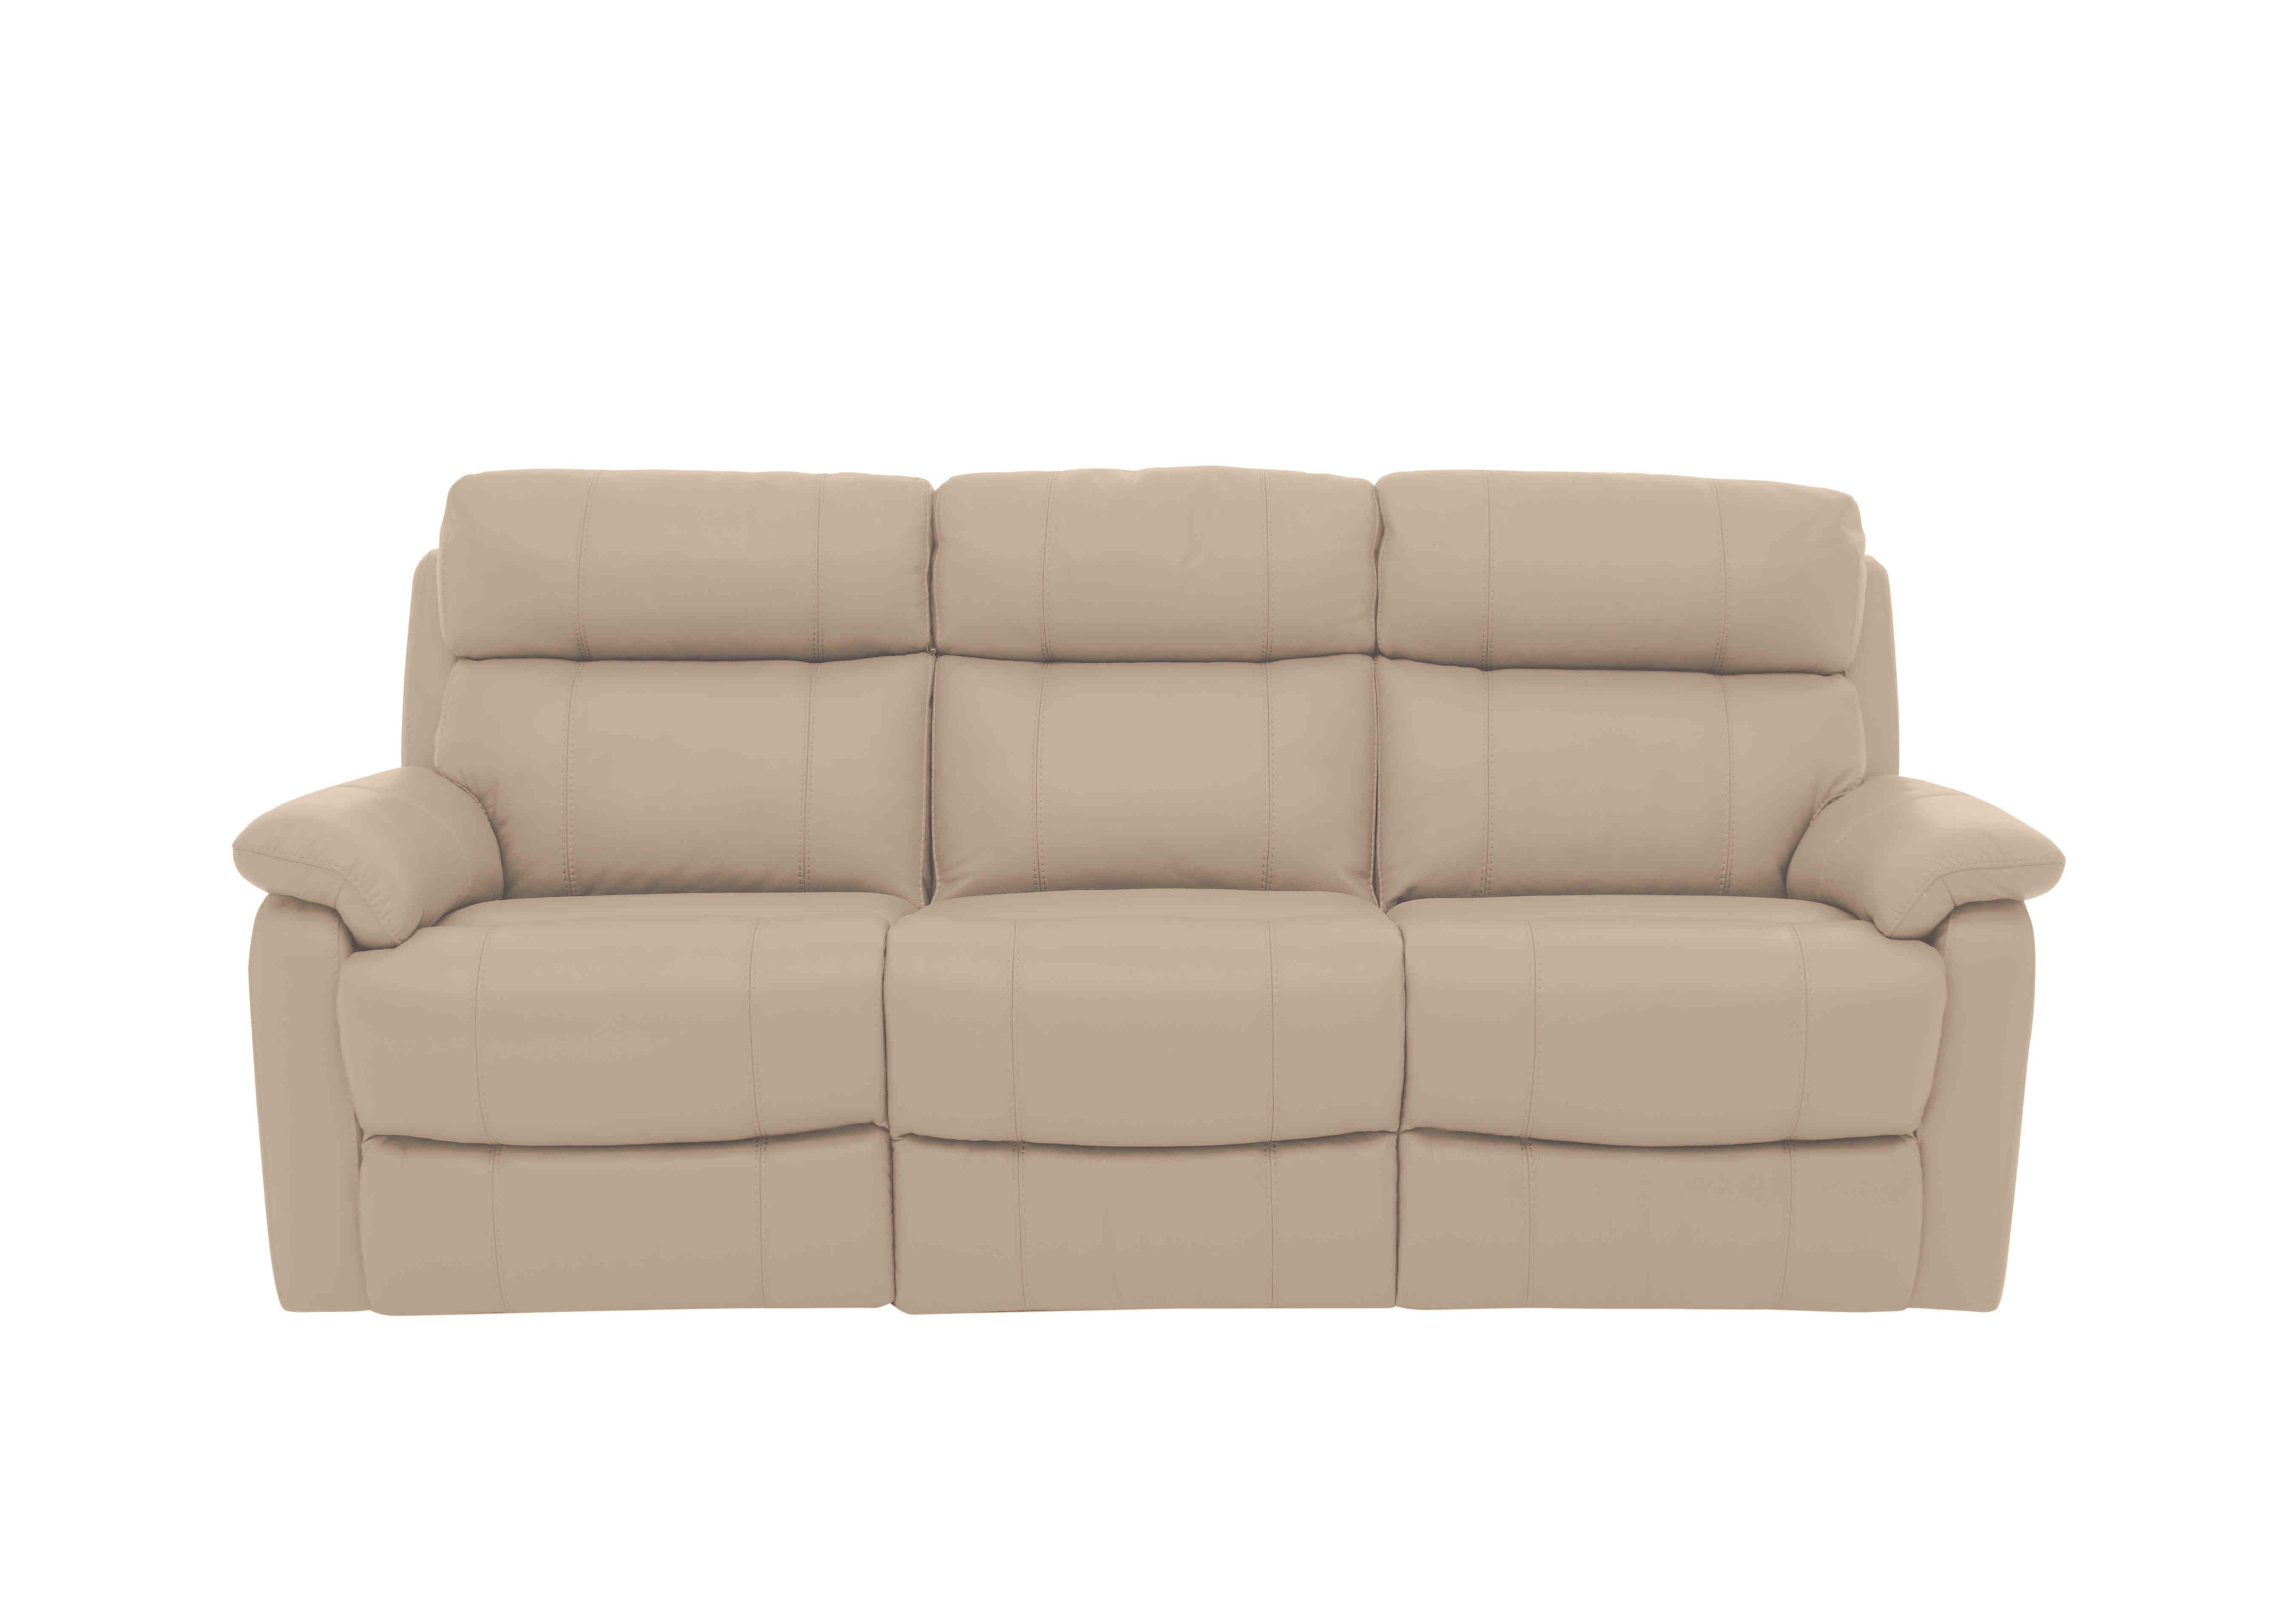 Relax Station Komodo 3 Seater Power Leather Sofa in Bv-039c Pebble on Furniture Village